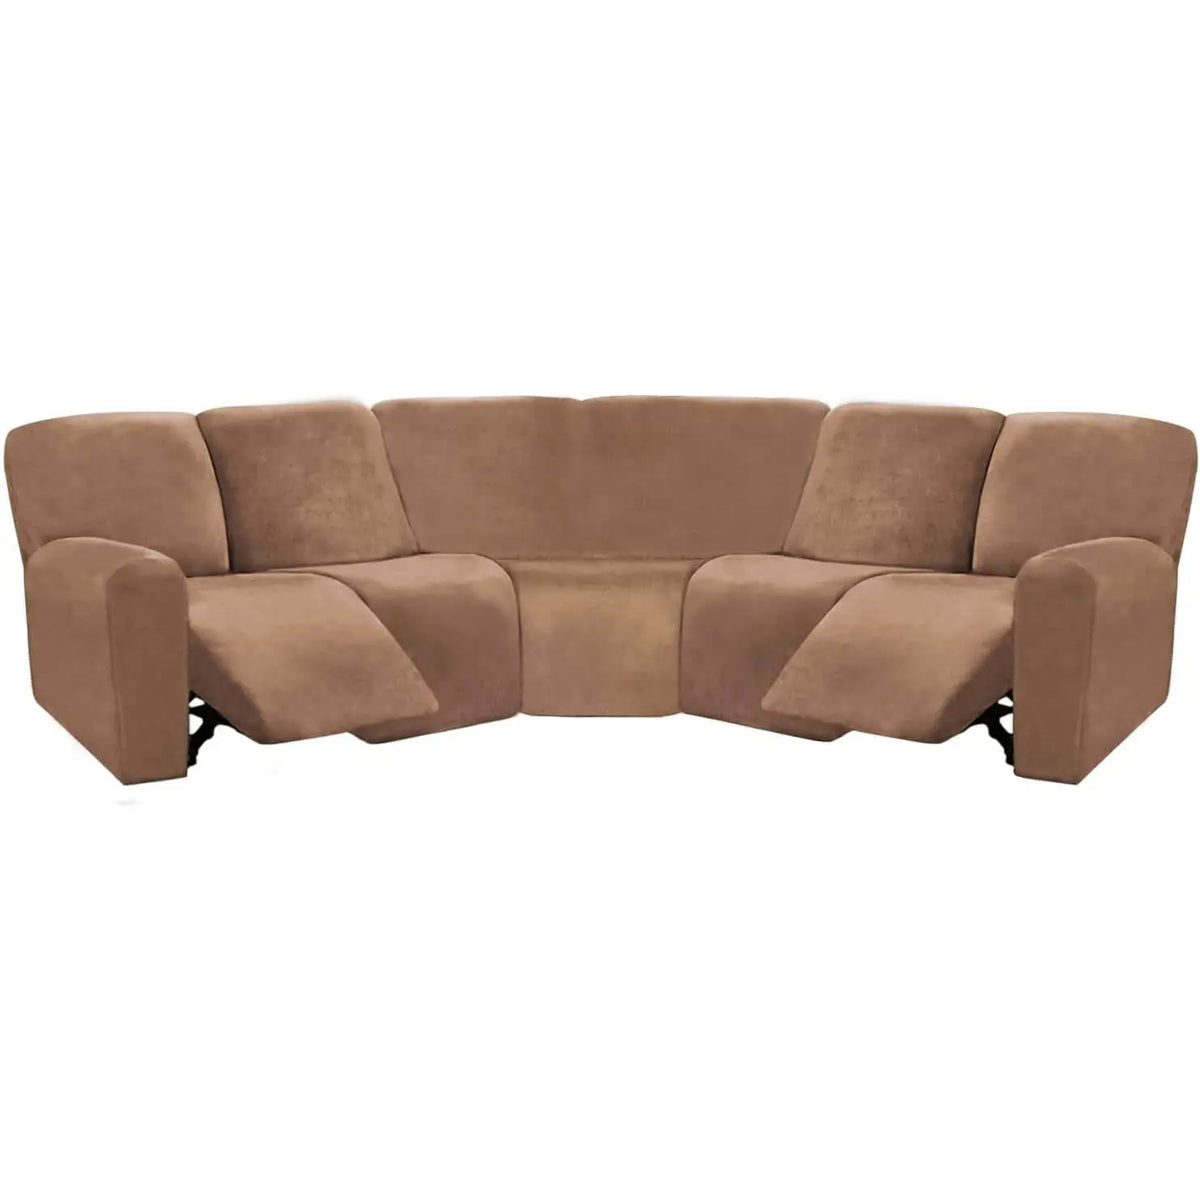 Crfatop 5-seater L Shape Sofa Cover with Recliner Camel